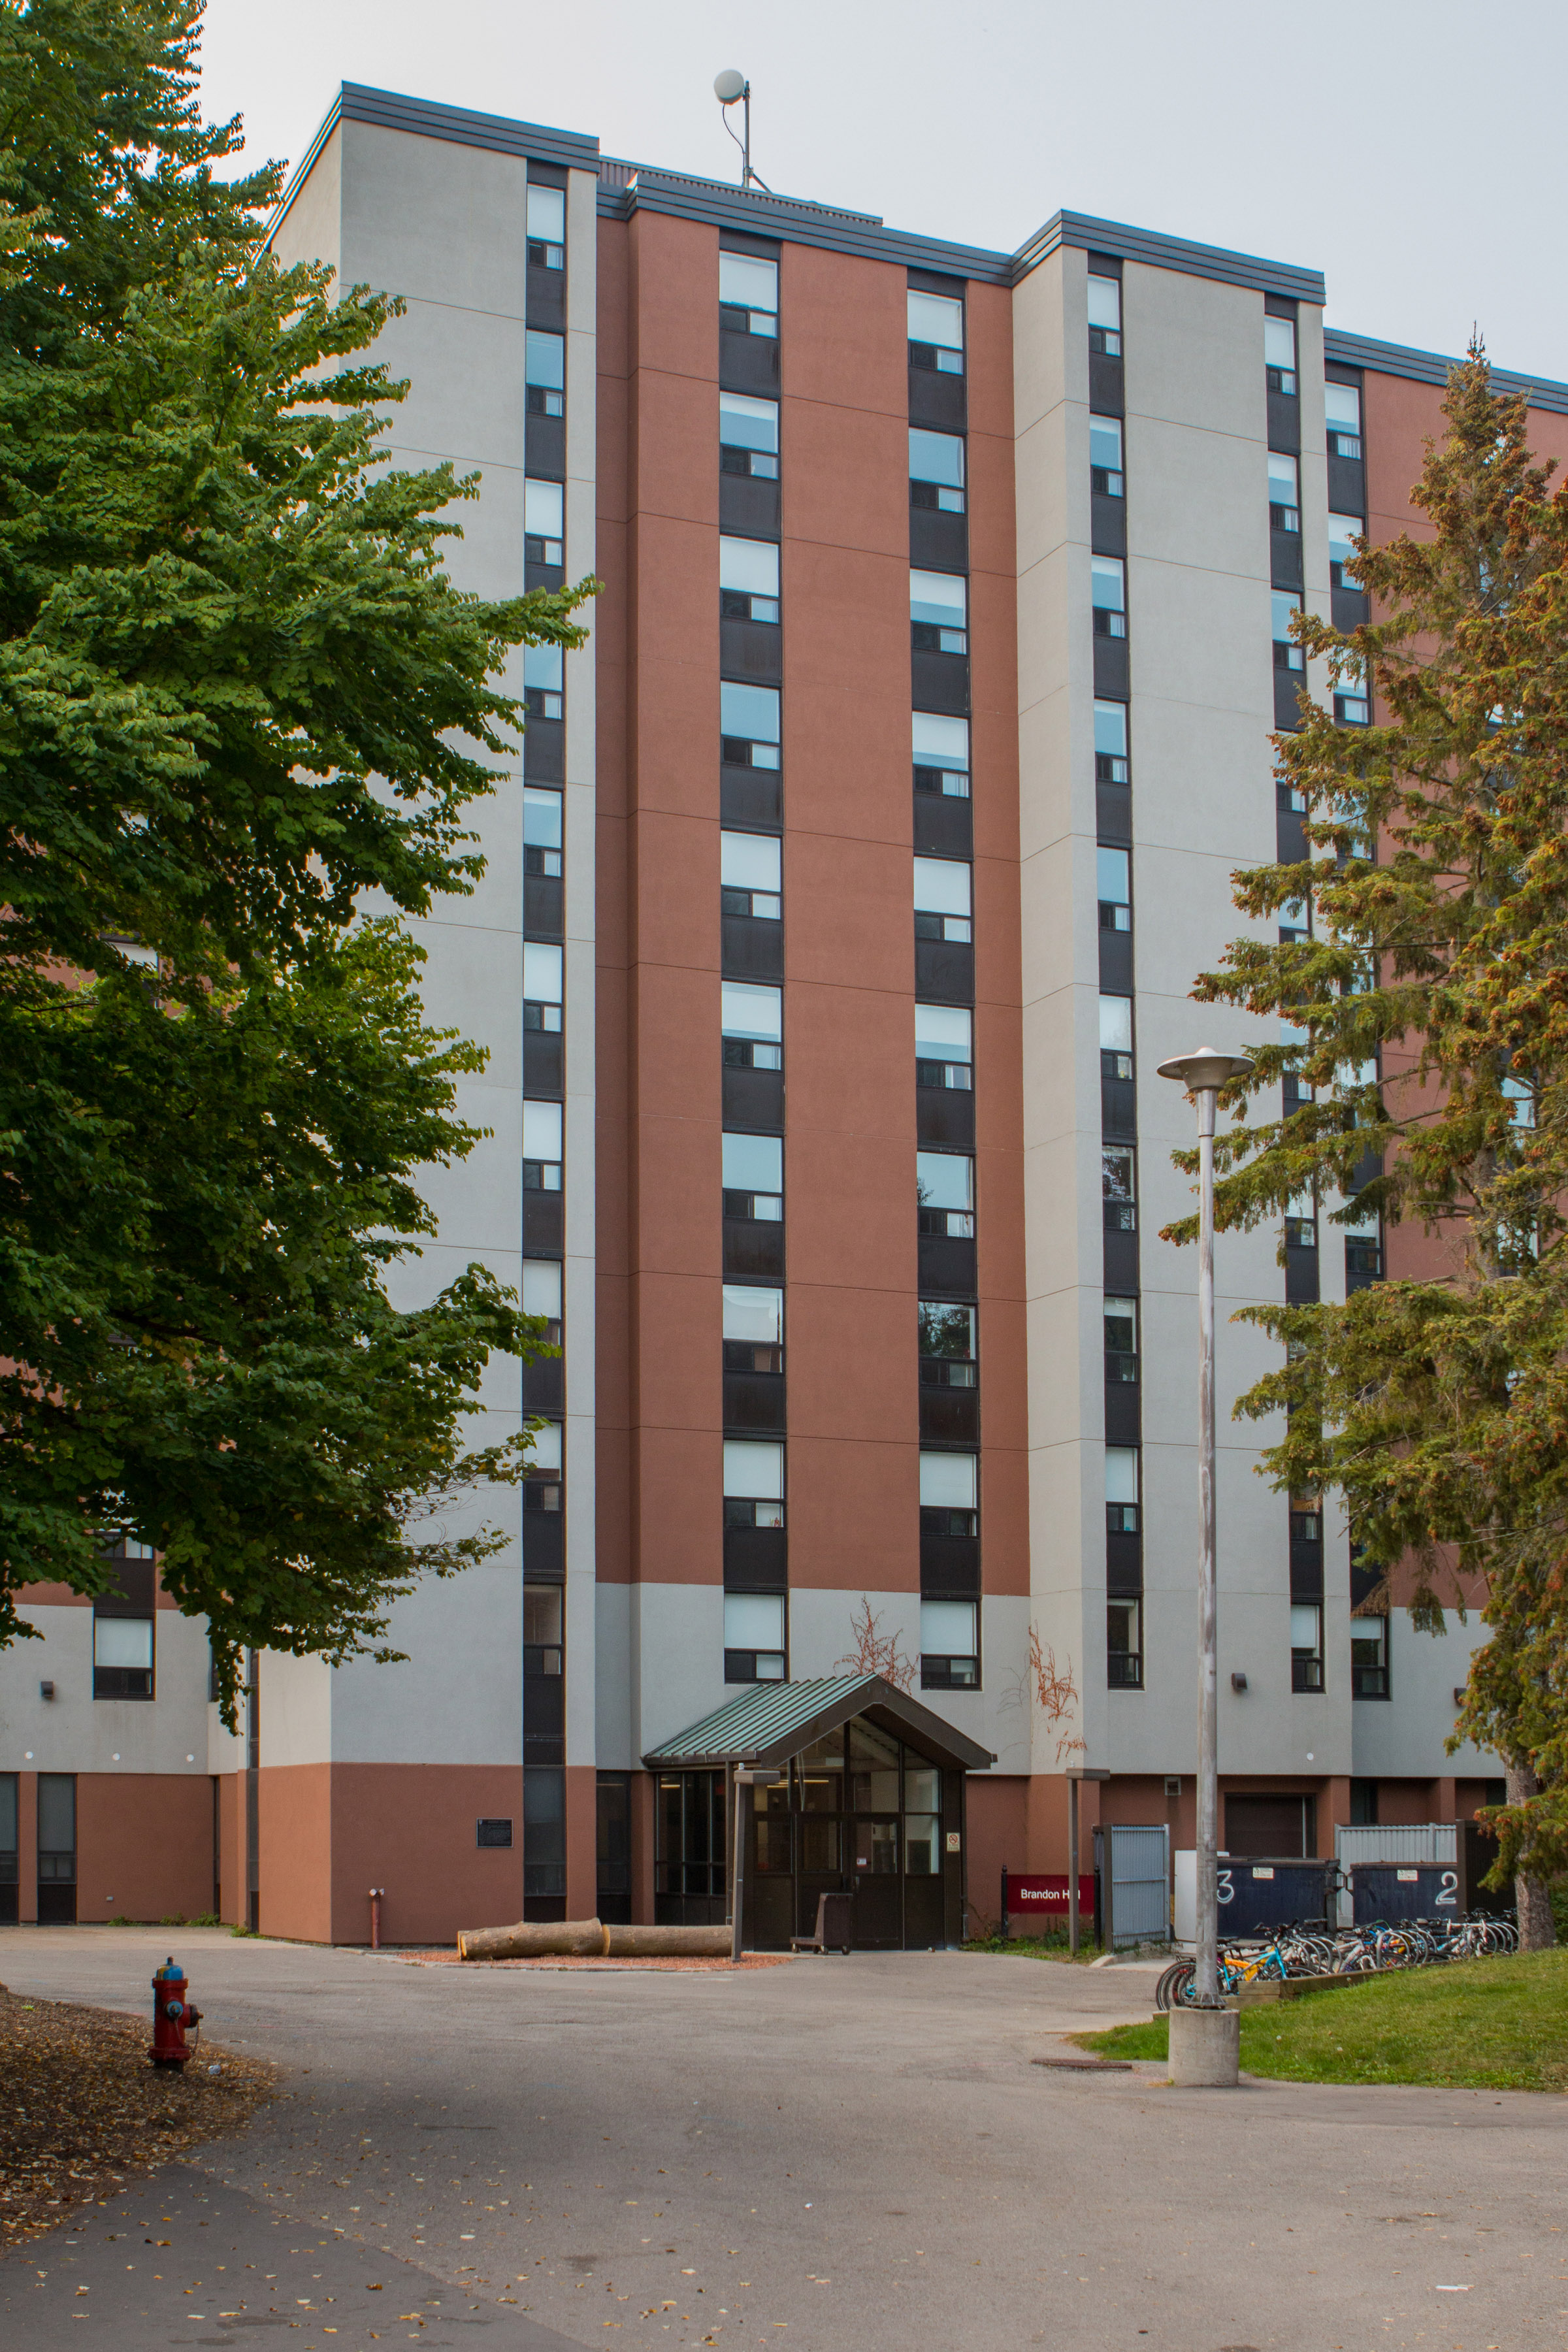 Brandon Hall is located in the north quad at McMaster University